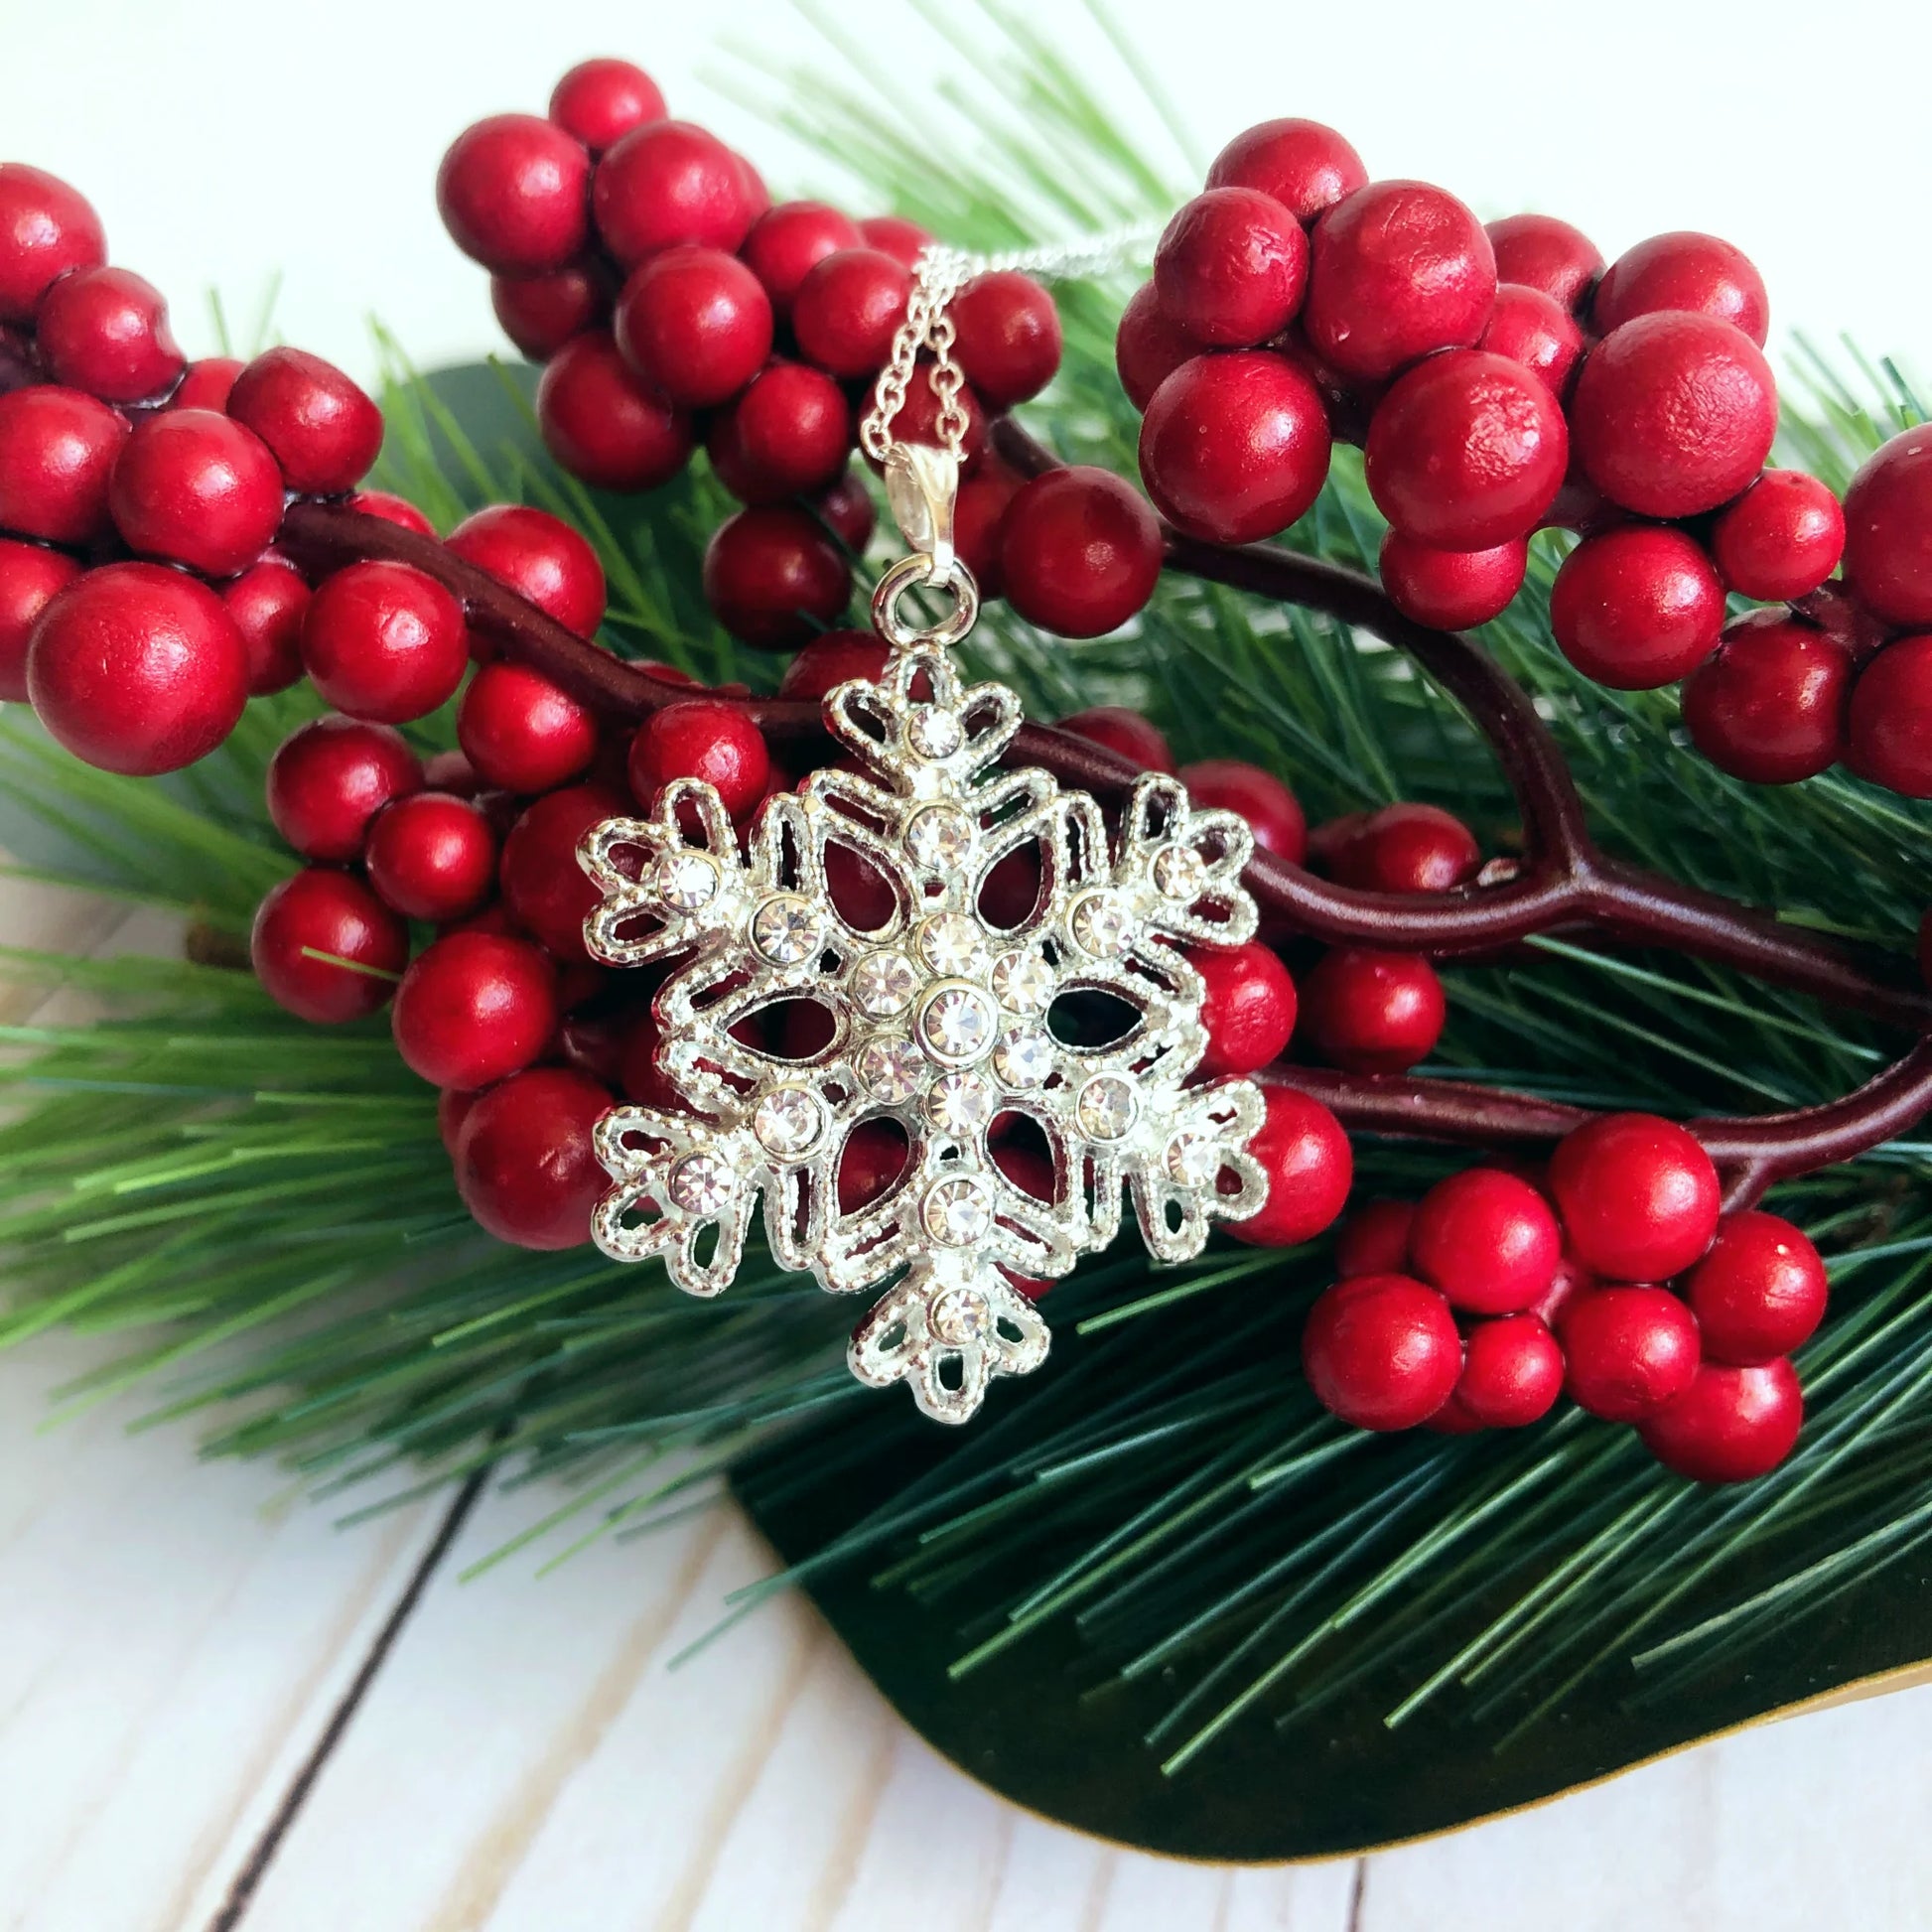 Silver snowflake pendants are perfect for Christmas and winter and go with any outfit